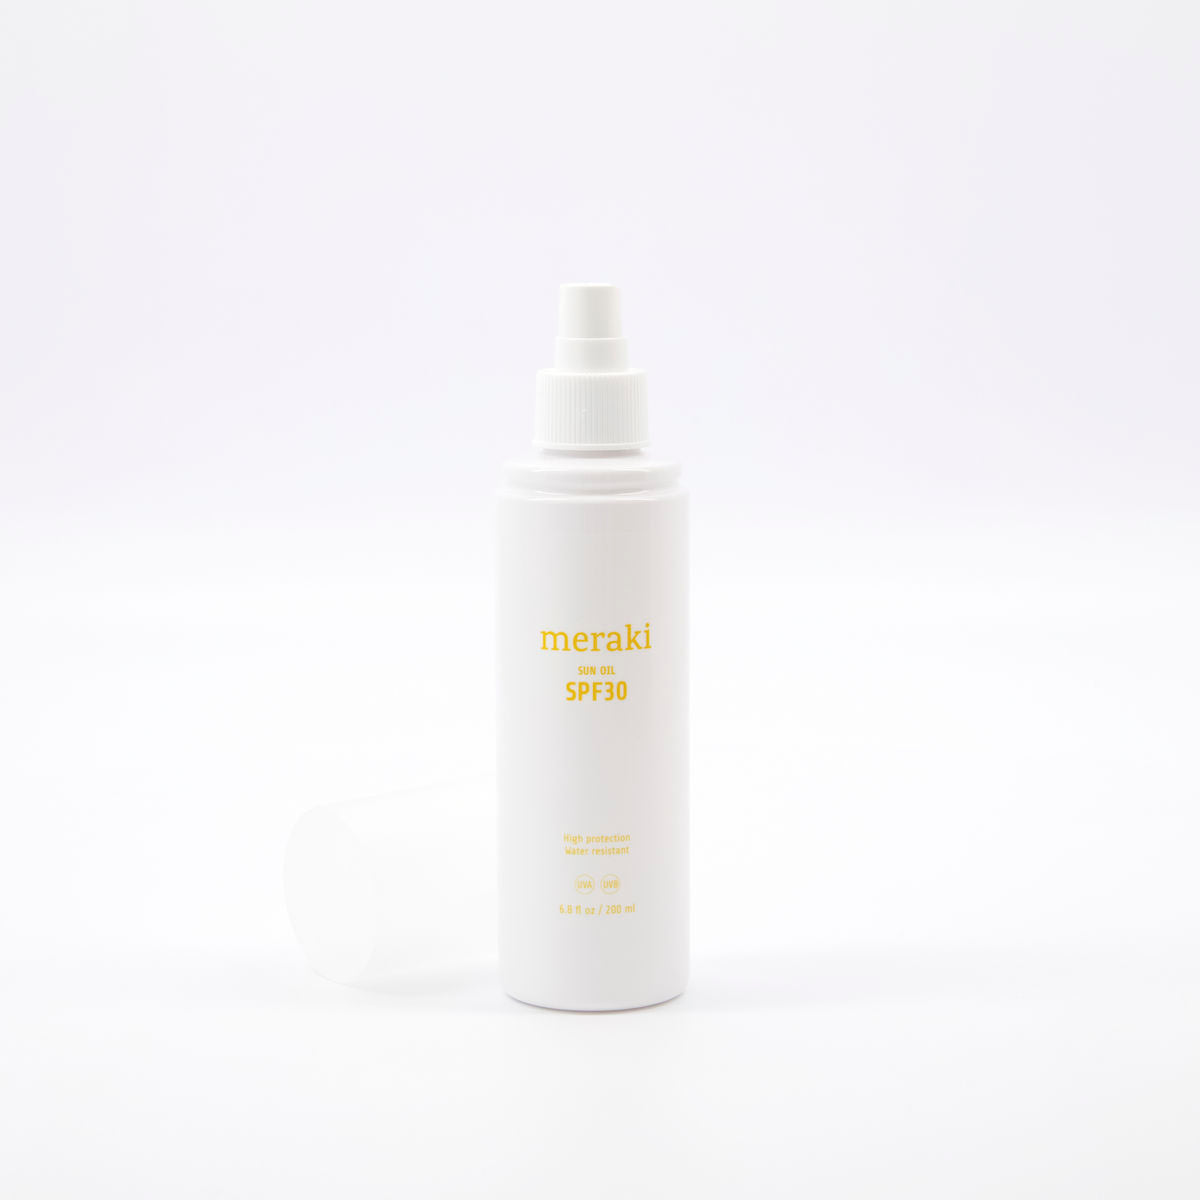 Sun Oil SPF 30 with Vitamin E, mildly scented with Florals & Fresh Mint